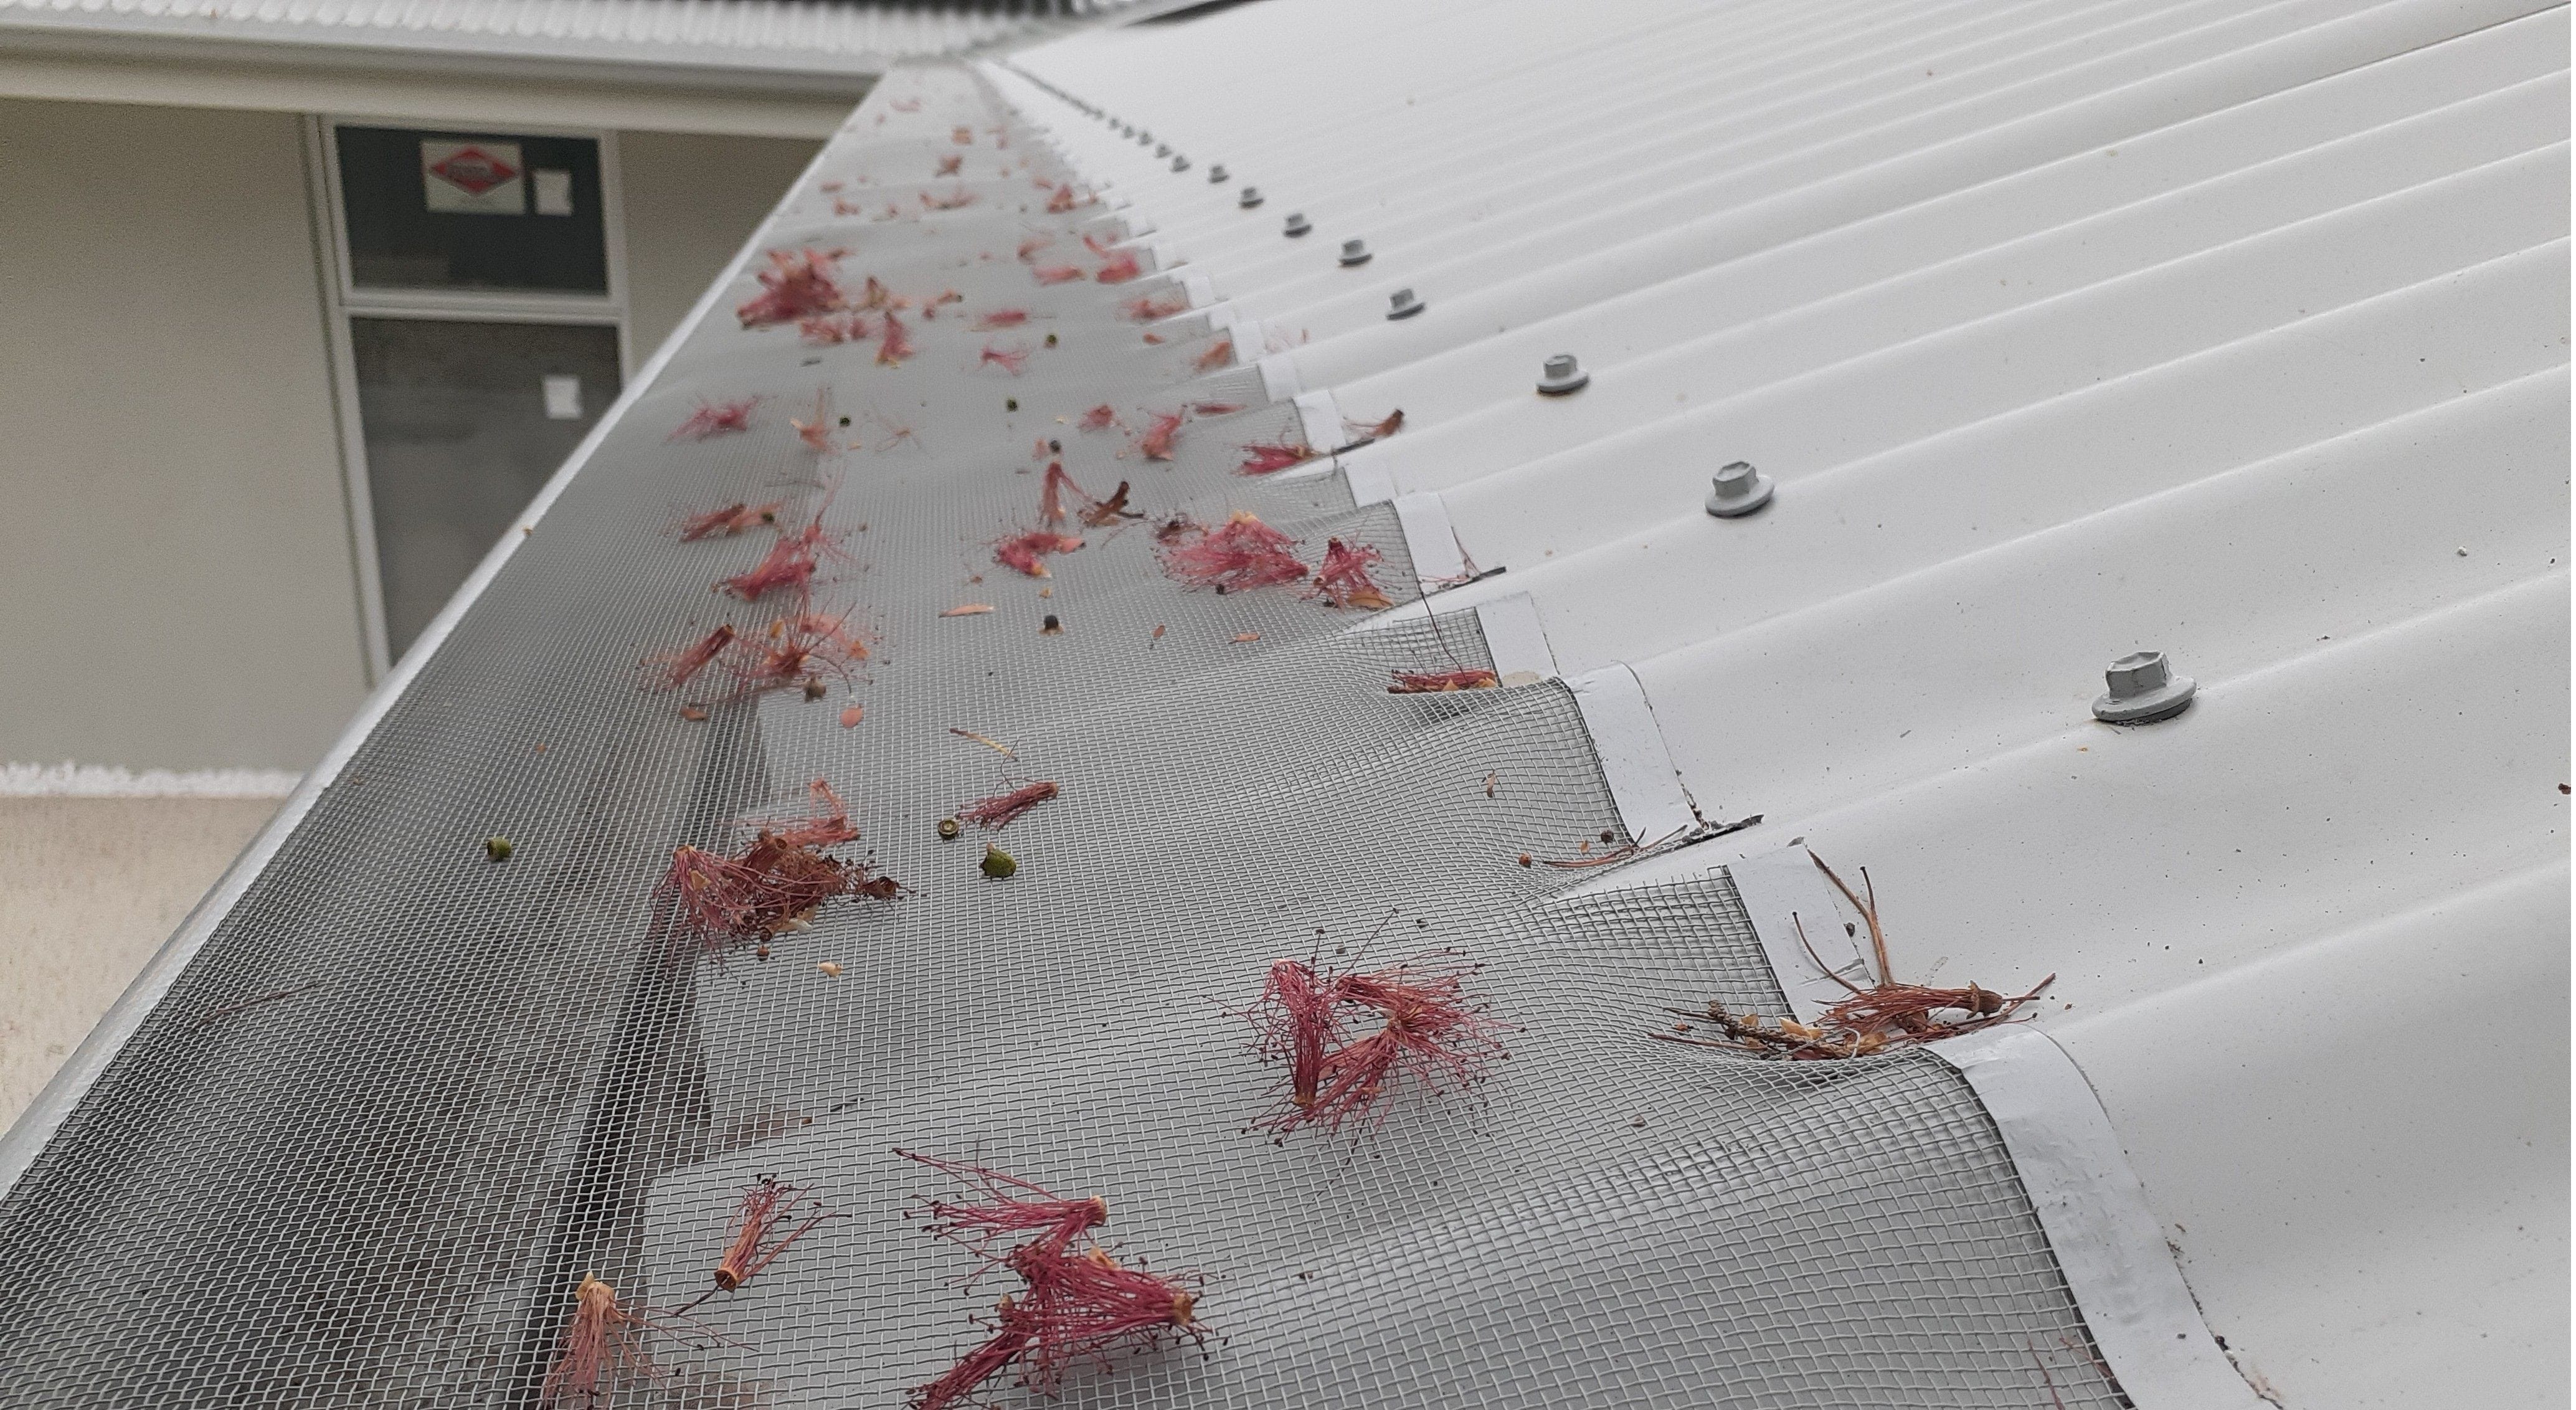 Aluminium Leaf Frre Gutter Guards installed on a tin/Colorbond Roof in Perth